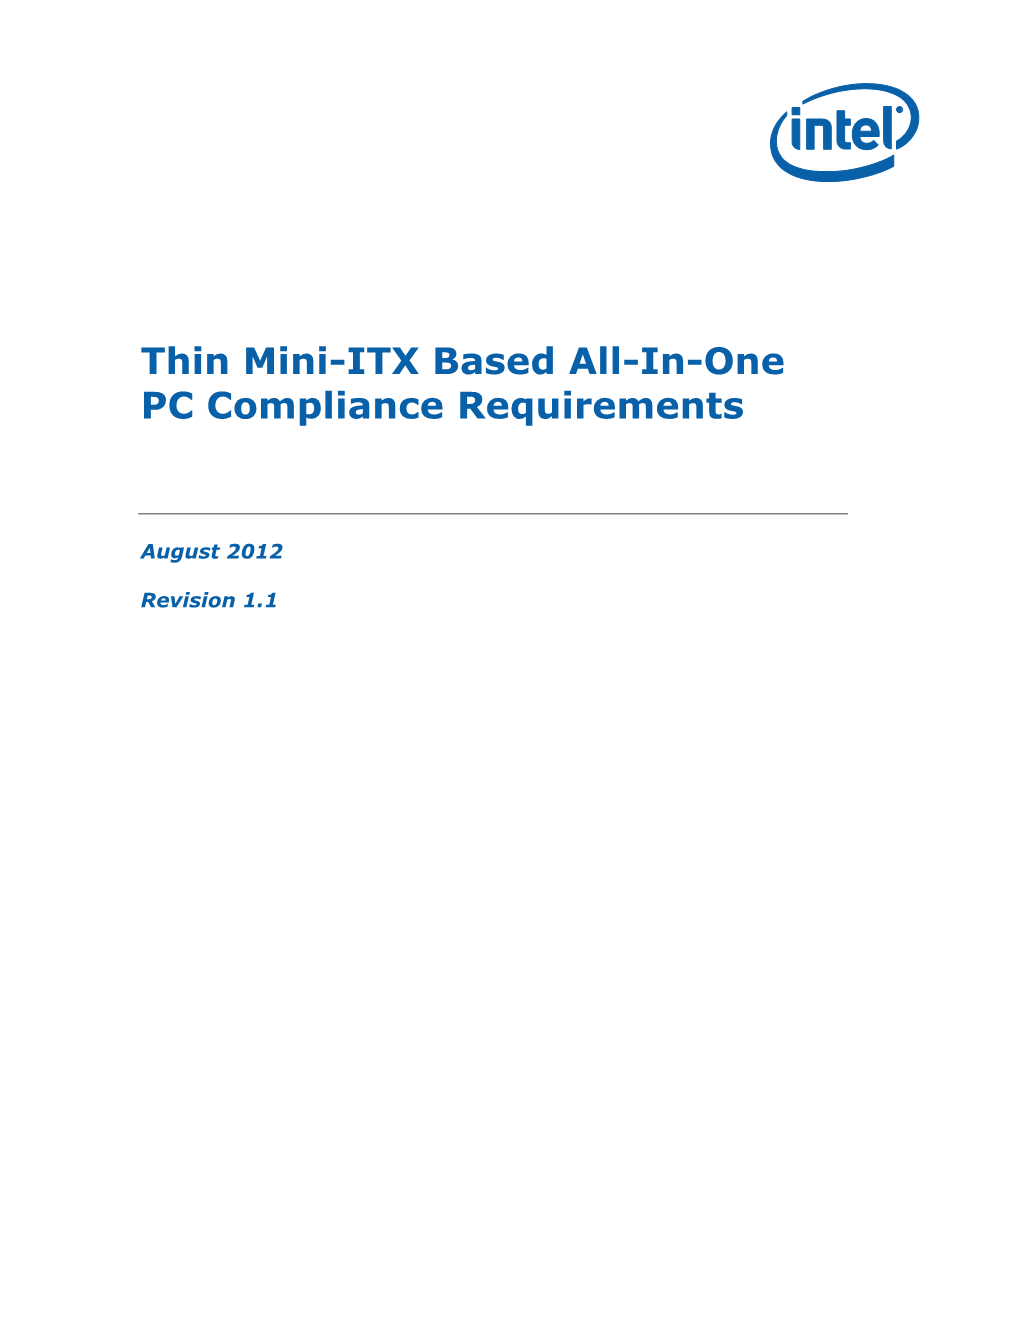 Thin Mini-ITX Based All-In-One PC Compliance Requirements